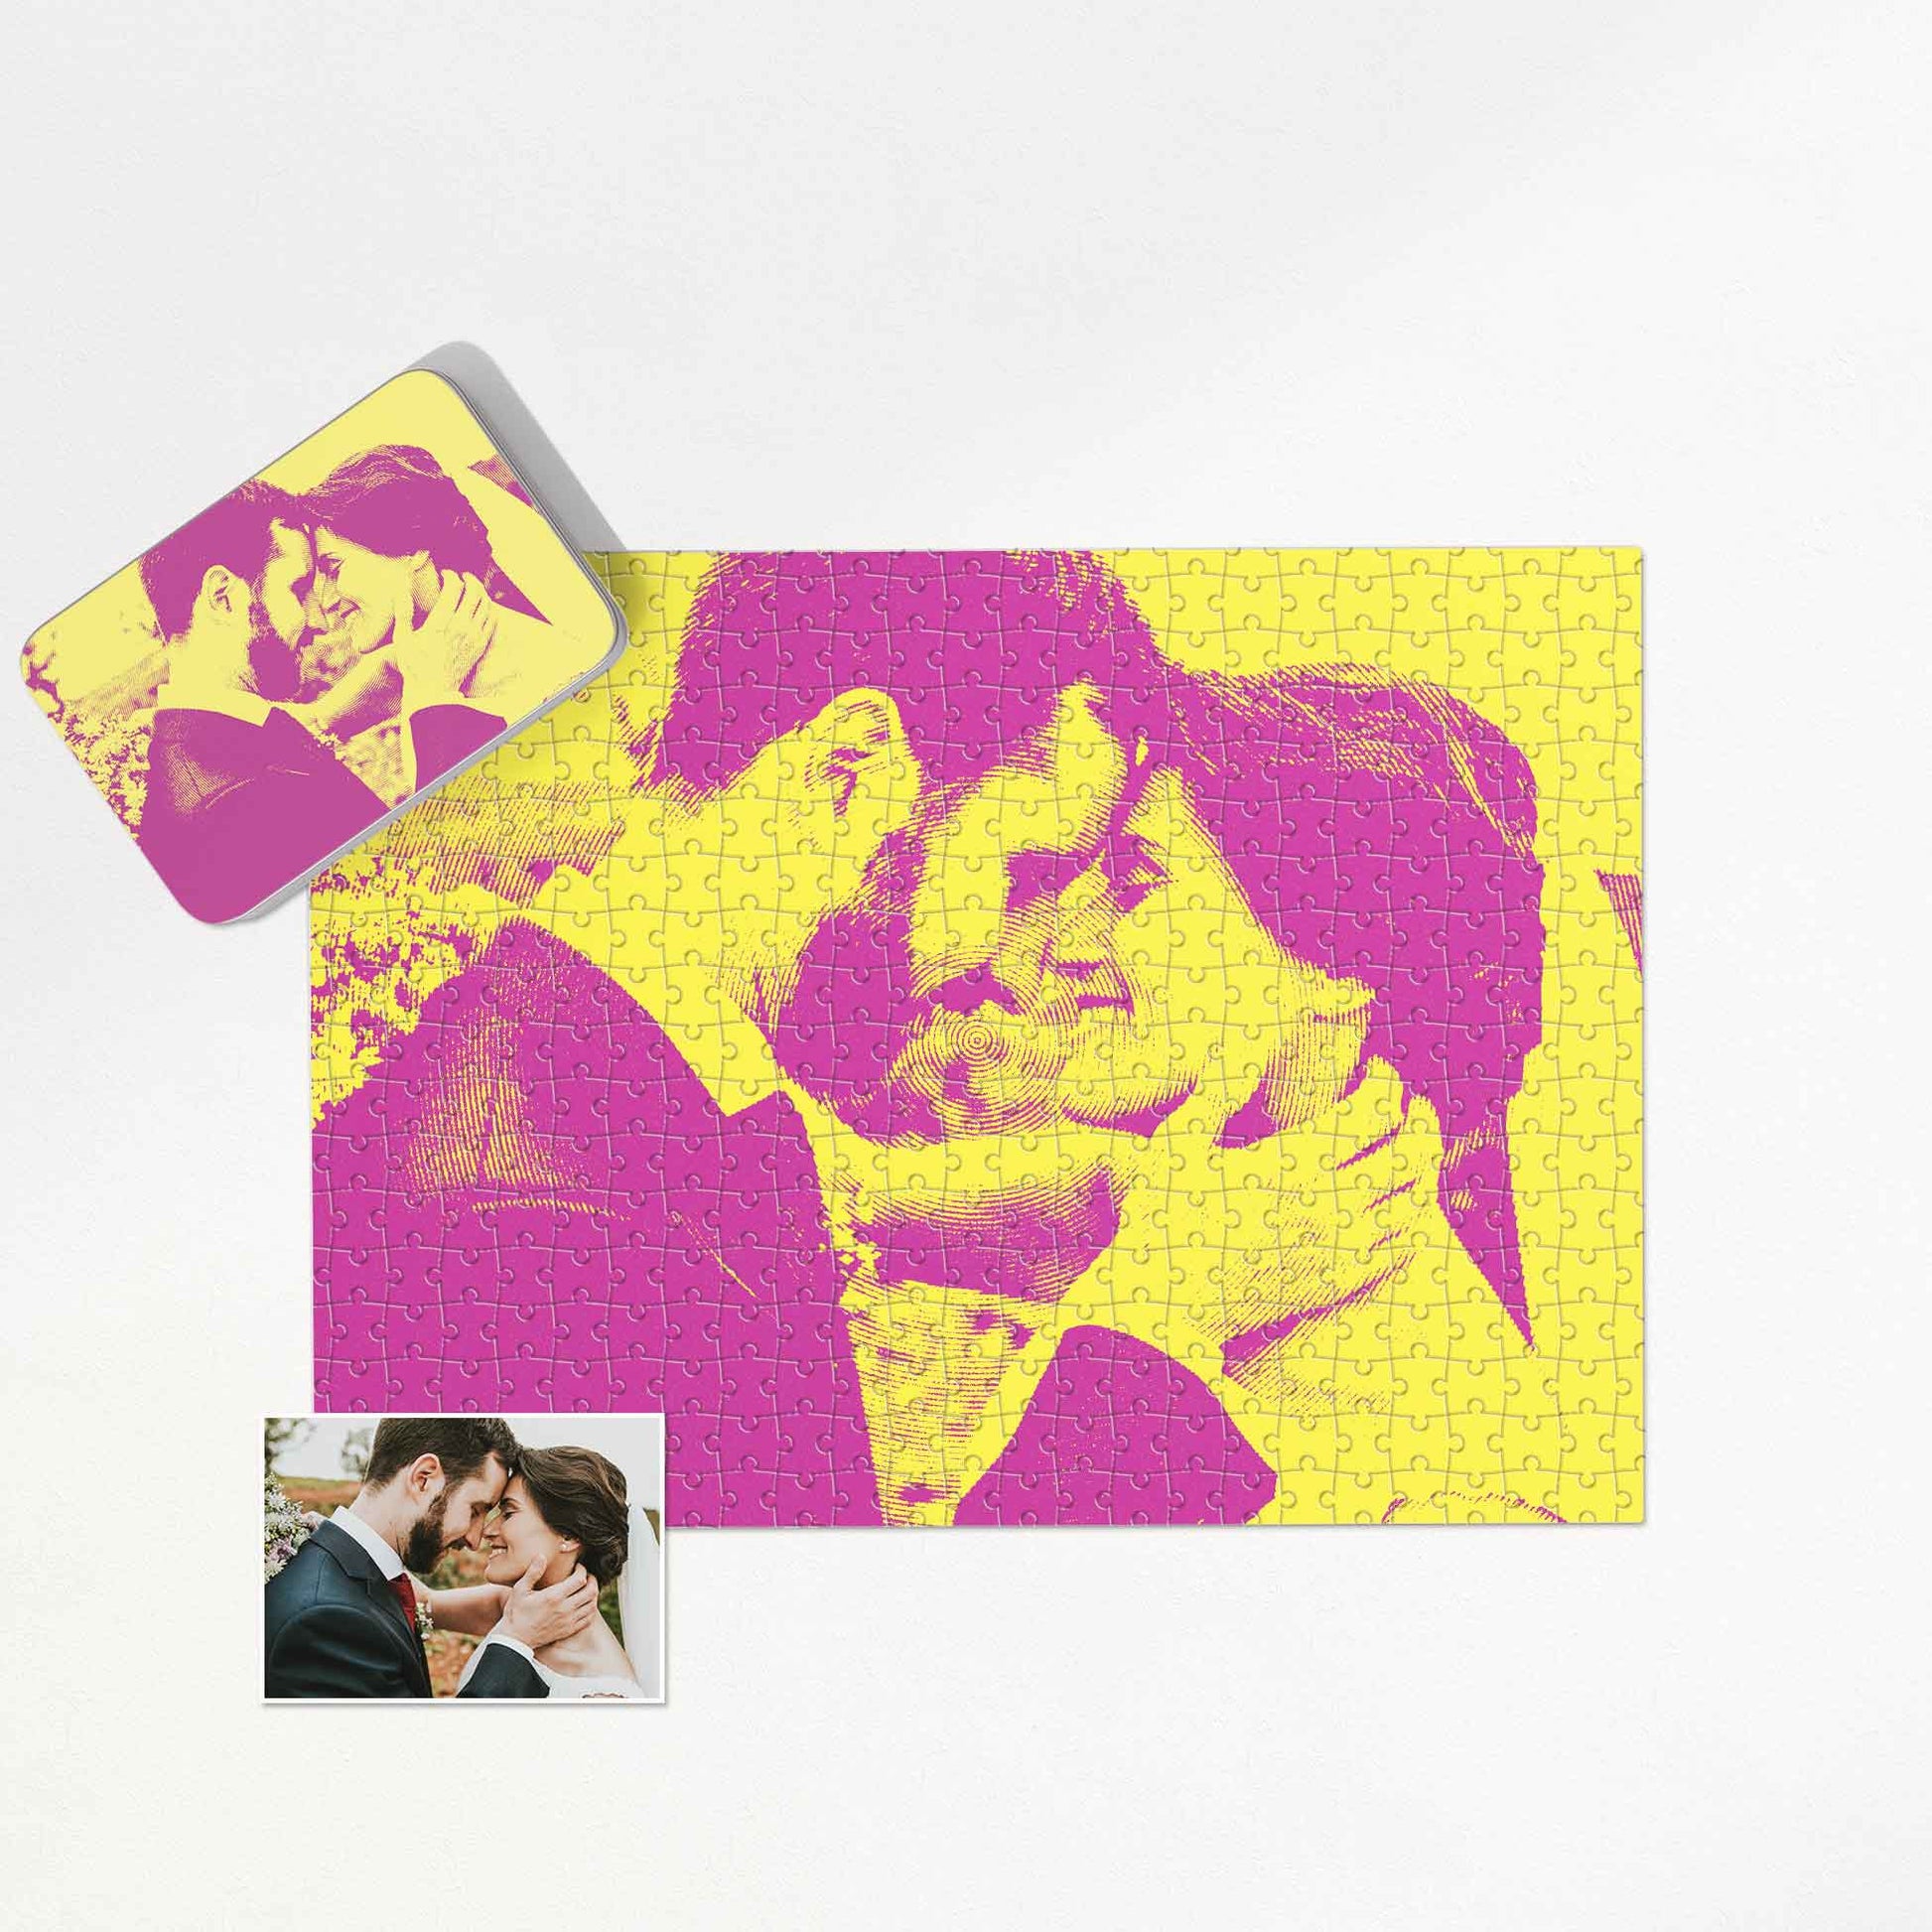 Create lasting memories with a Personalised Yellow & Pink Texture Jigsaw Puzzle. Print from photo in abstract style, featuring cool yellow and pink hues. Handmade with love, it's a unique and creative gift for family and friends